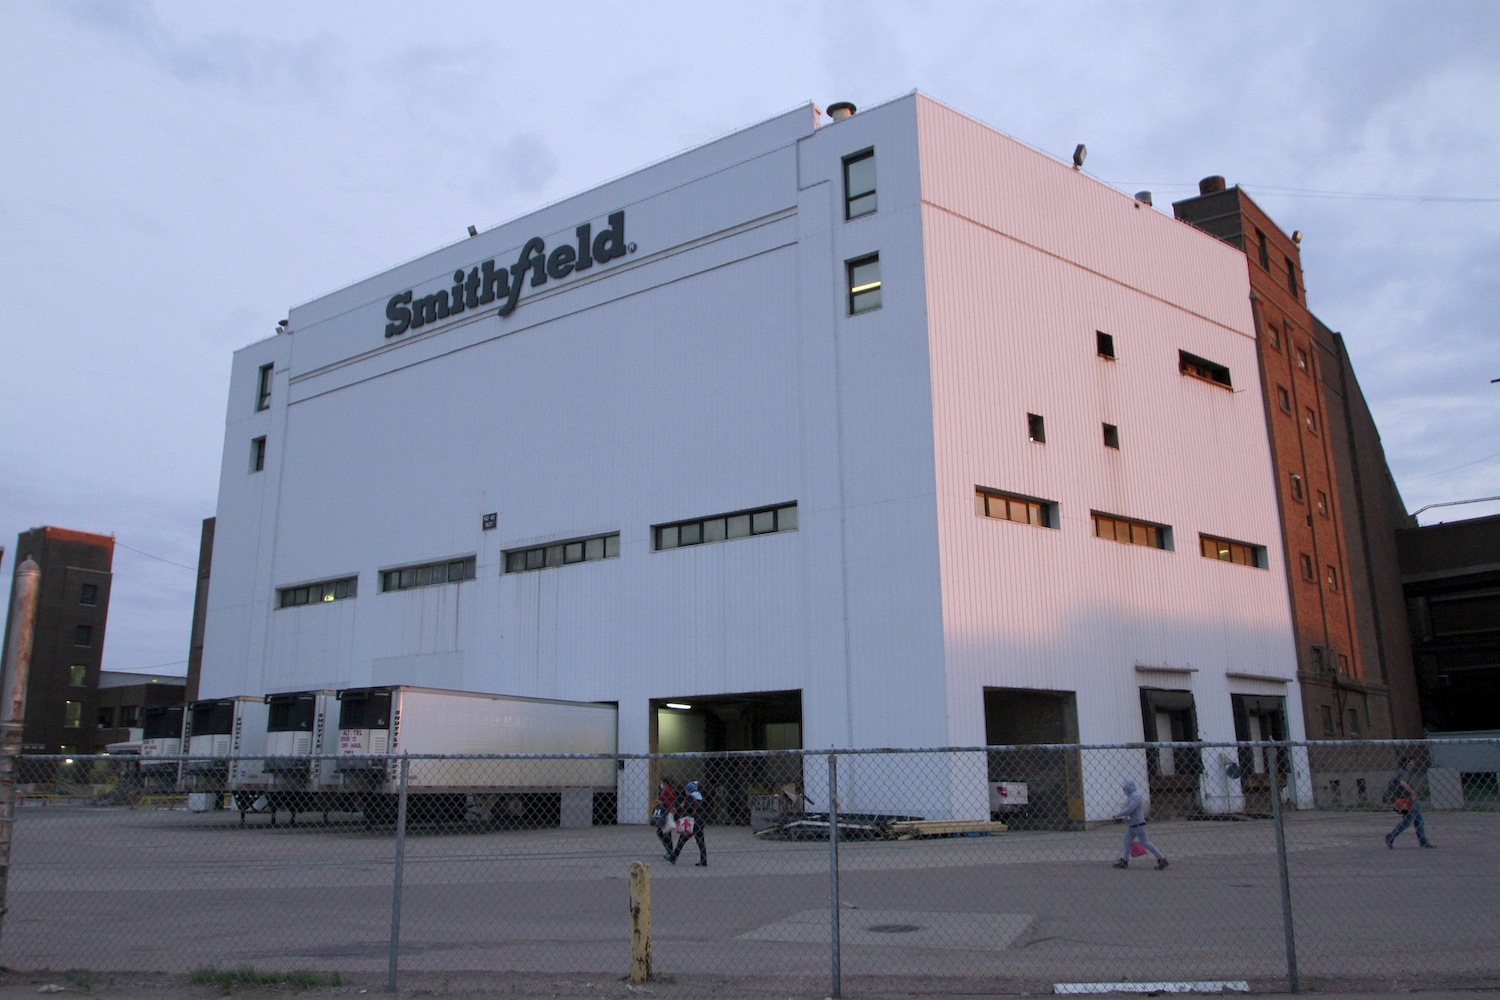 Smithfield pork processing plant in Sioux Falls, SD August 2020